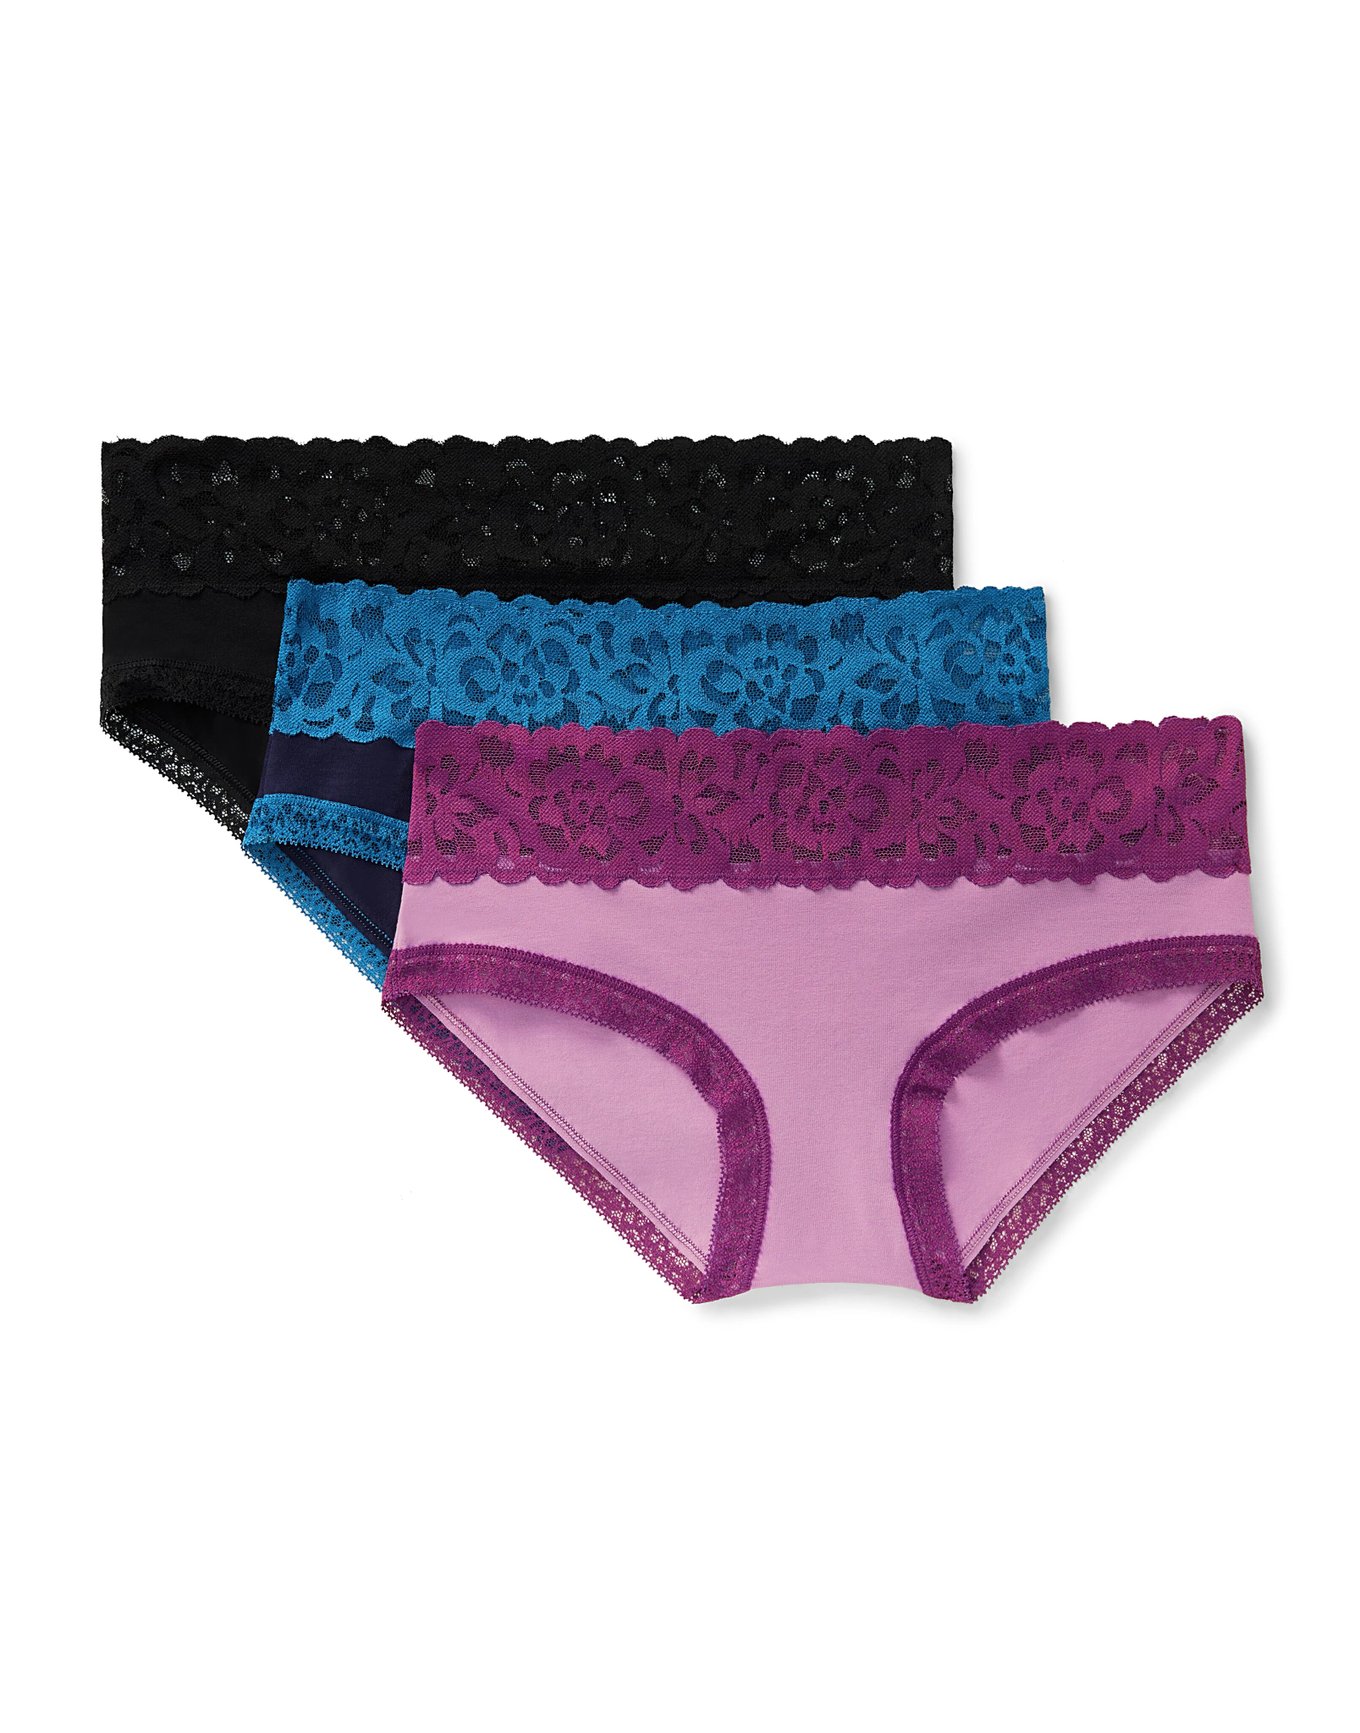 Millie Cotton Pack Hipster Black Plus Hipster Panties (Pack of 3)